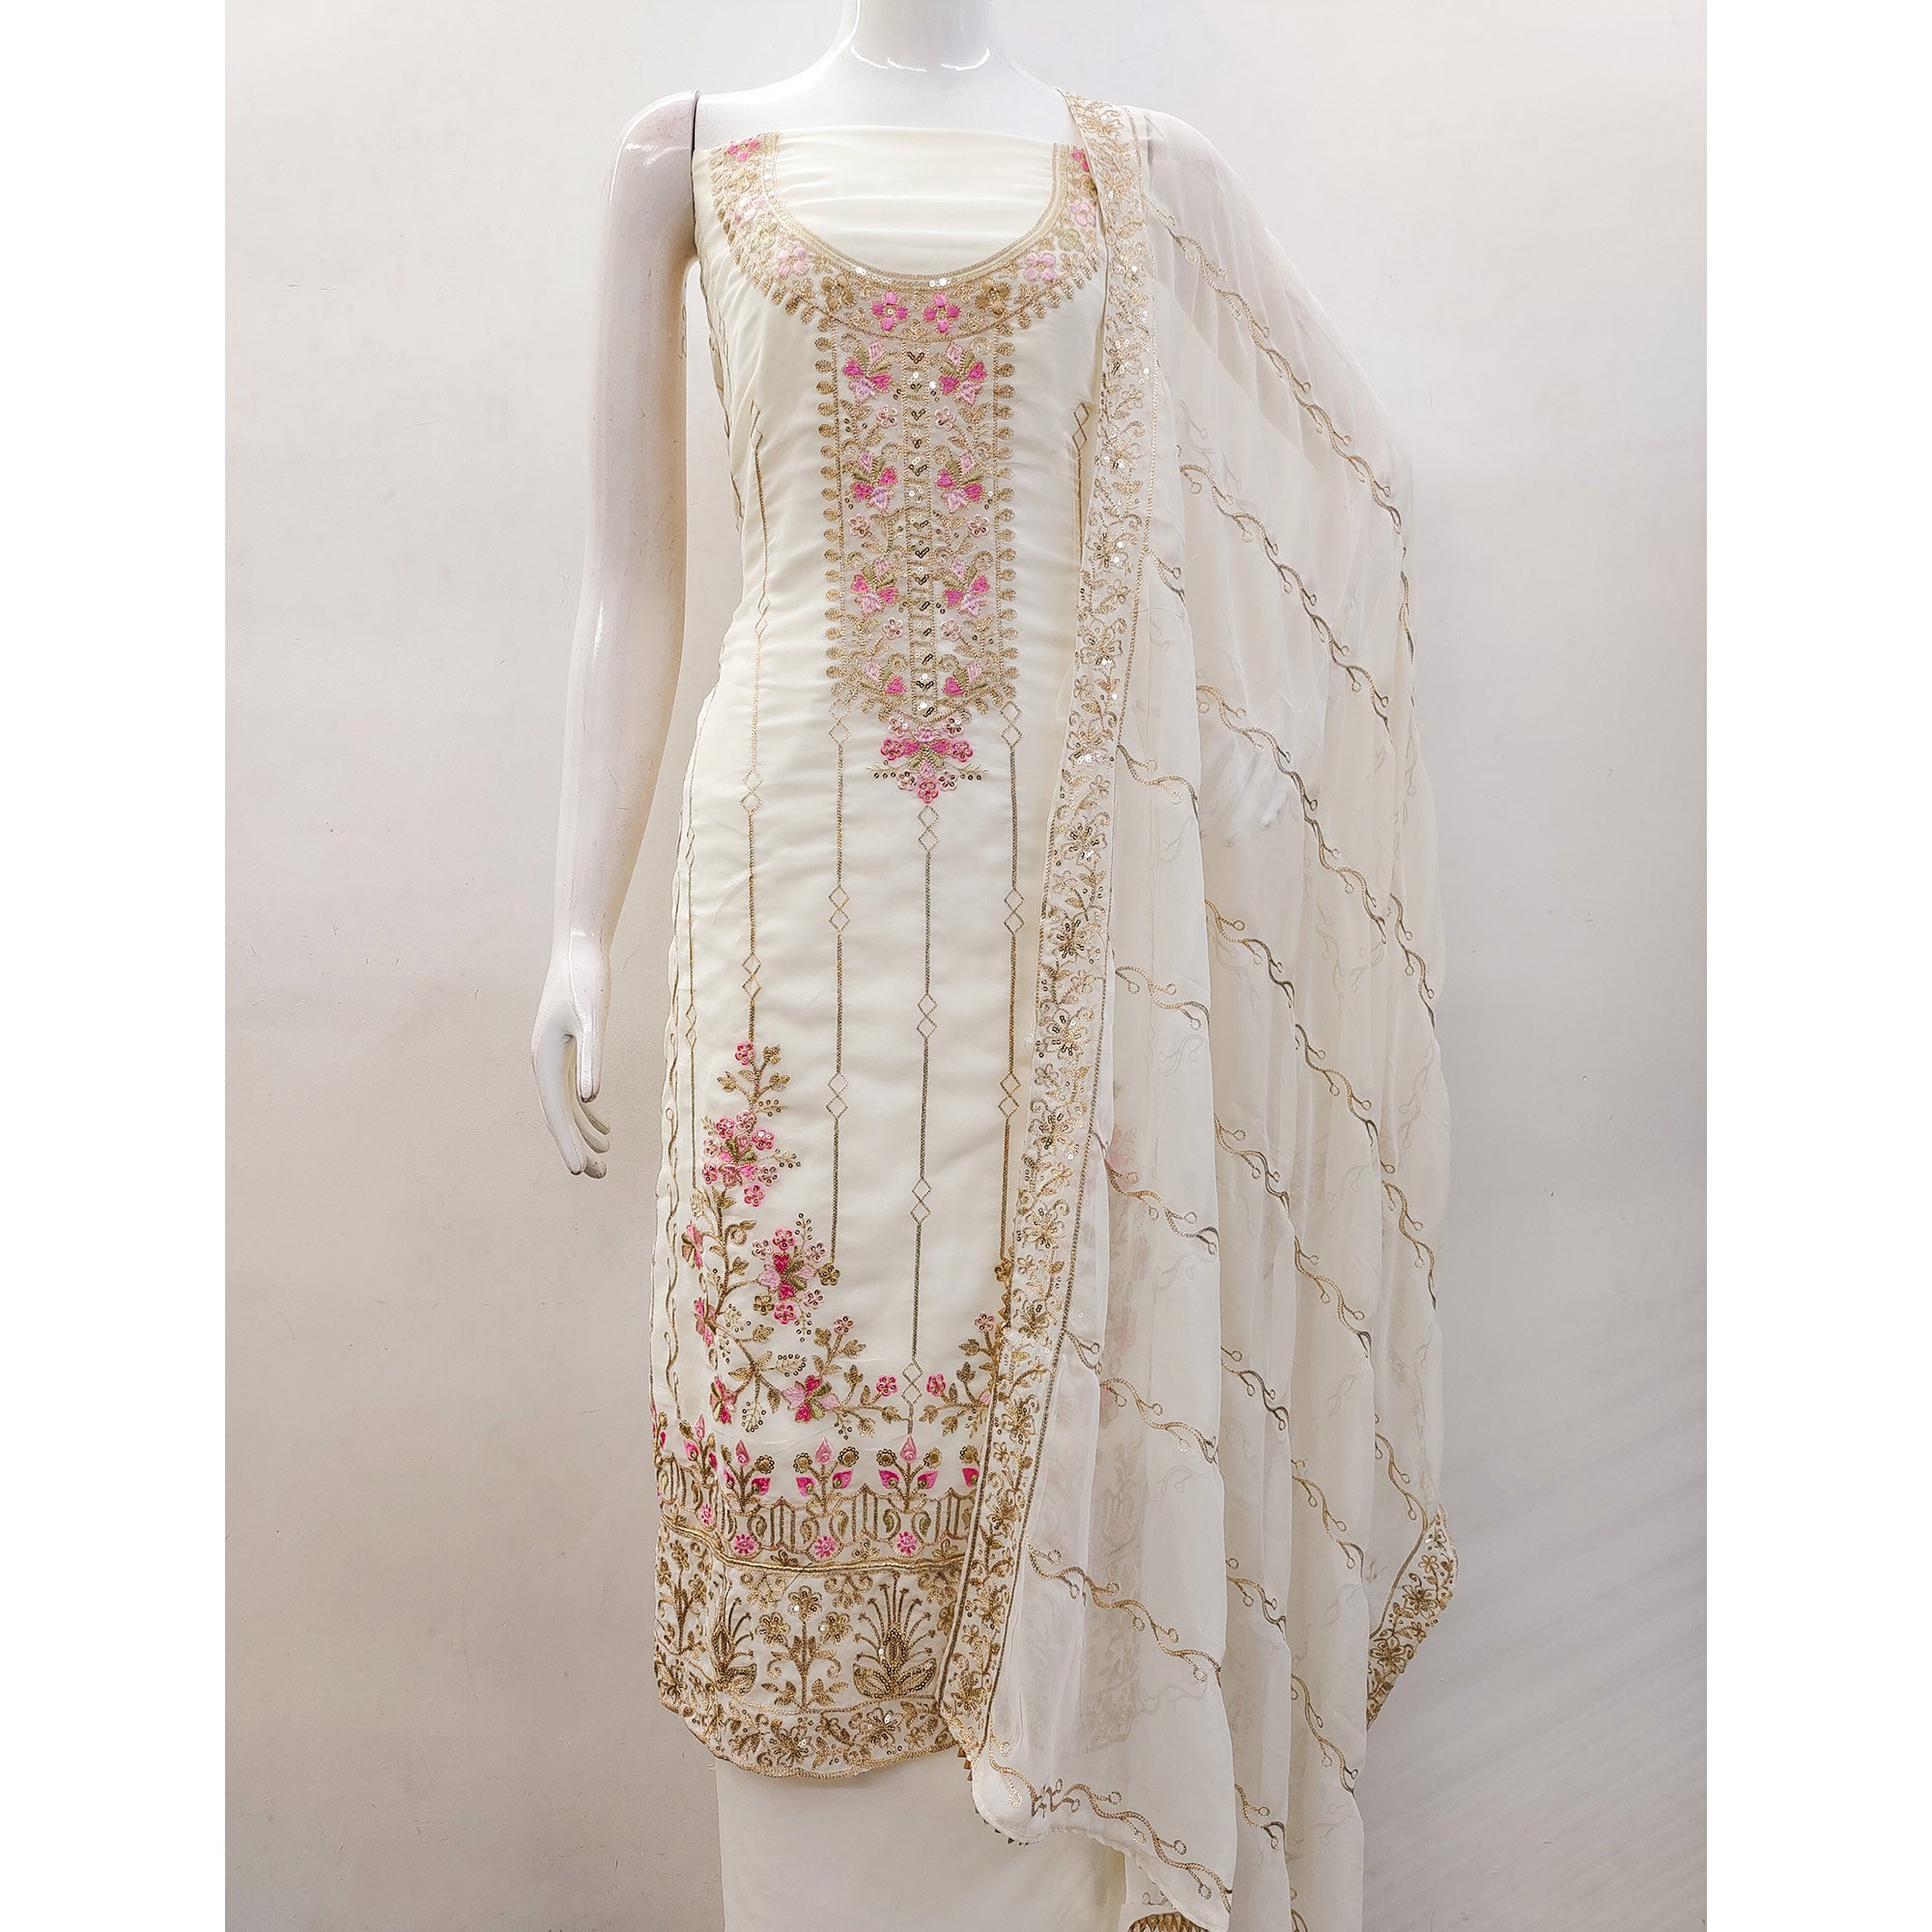 Off White Embroidered Georgette Dress Material